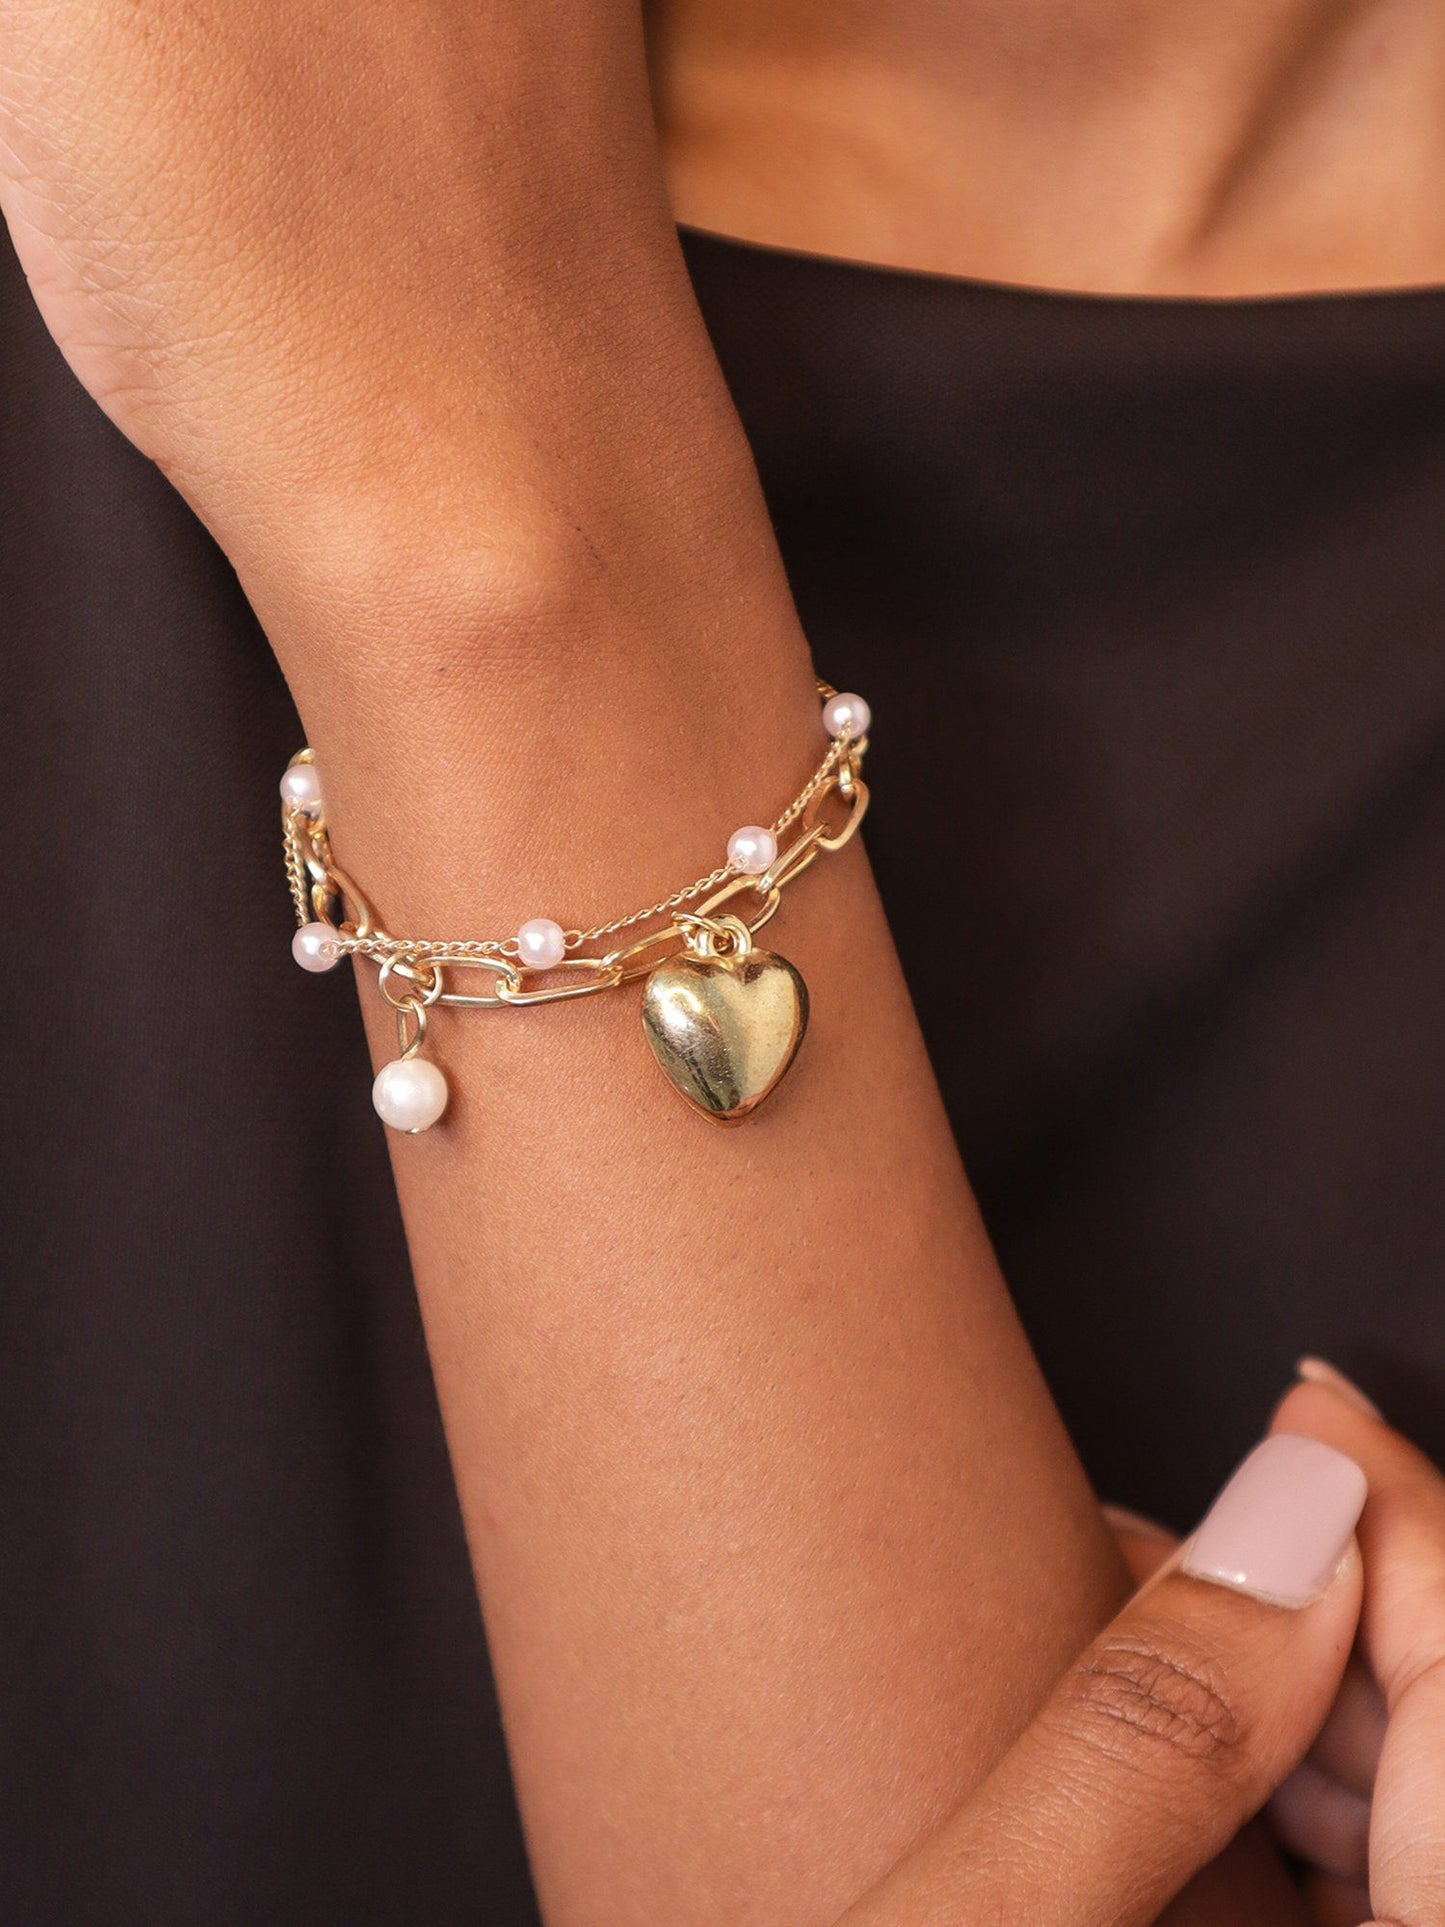 Minimal Gold Plated and Pearl Bracelet with Heart Charm